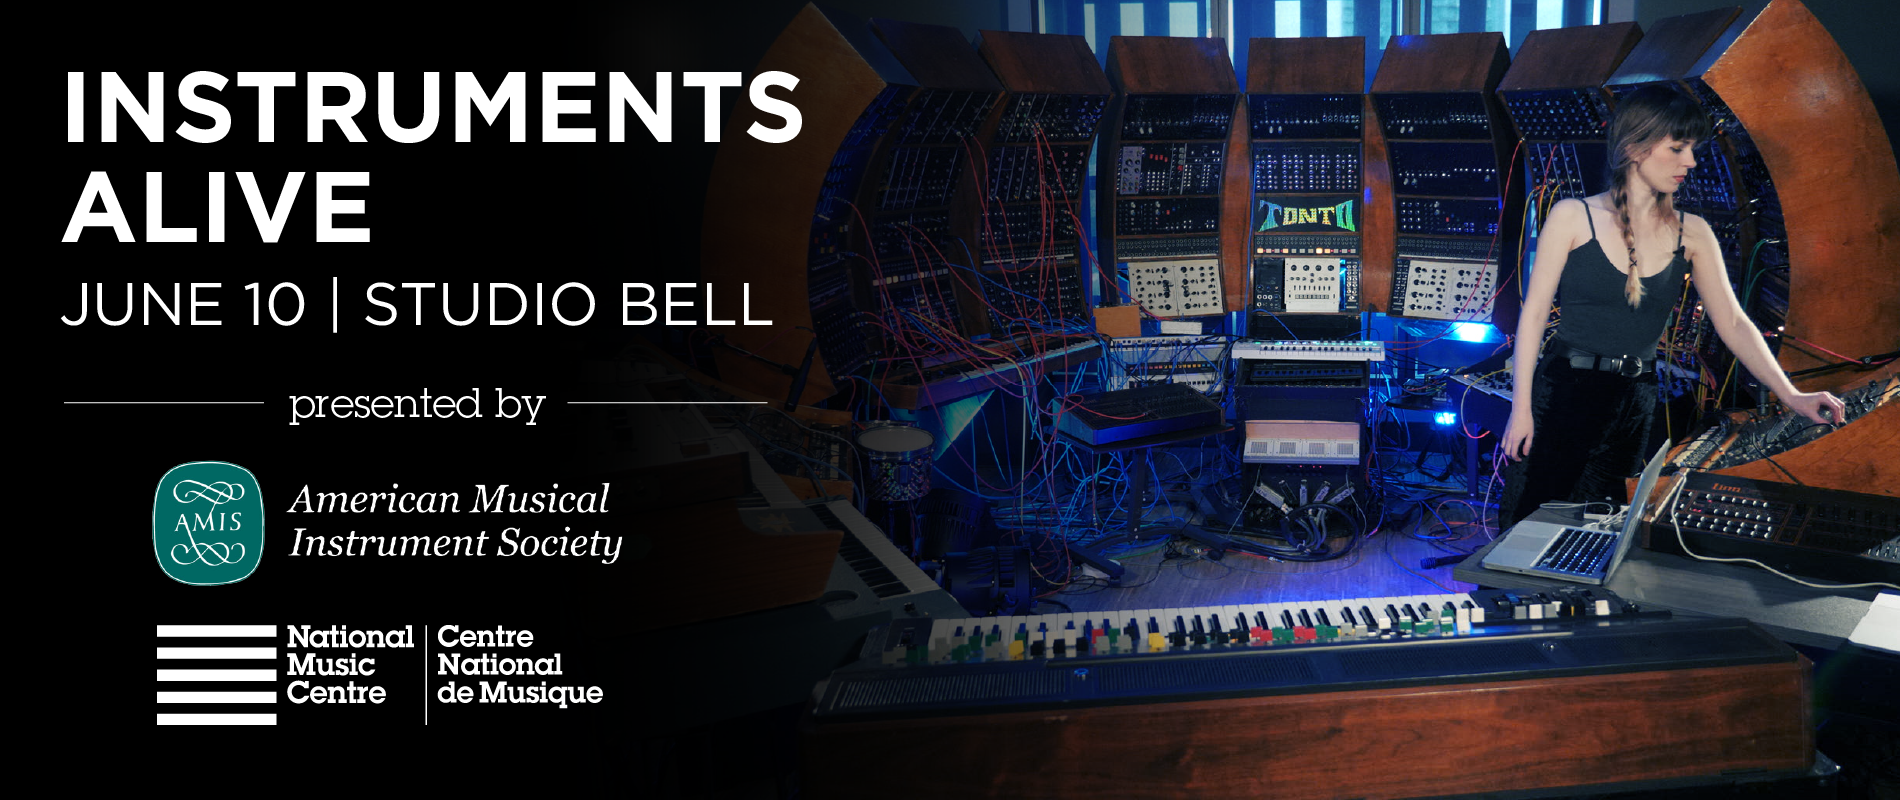 NMC and AMIS Present: Instruments Alive Tickets